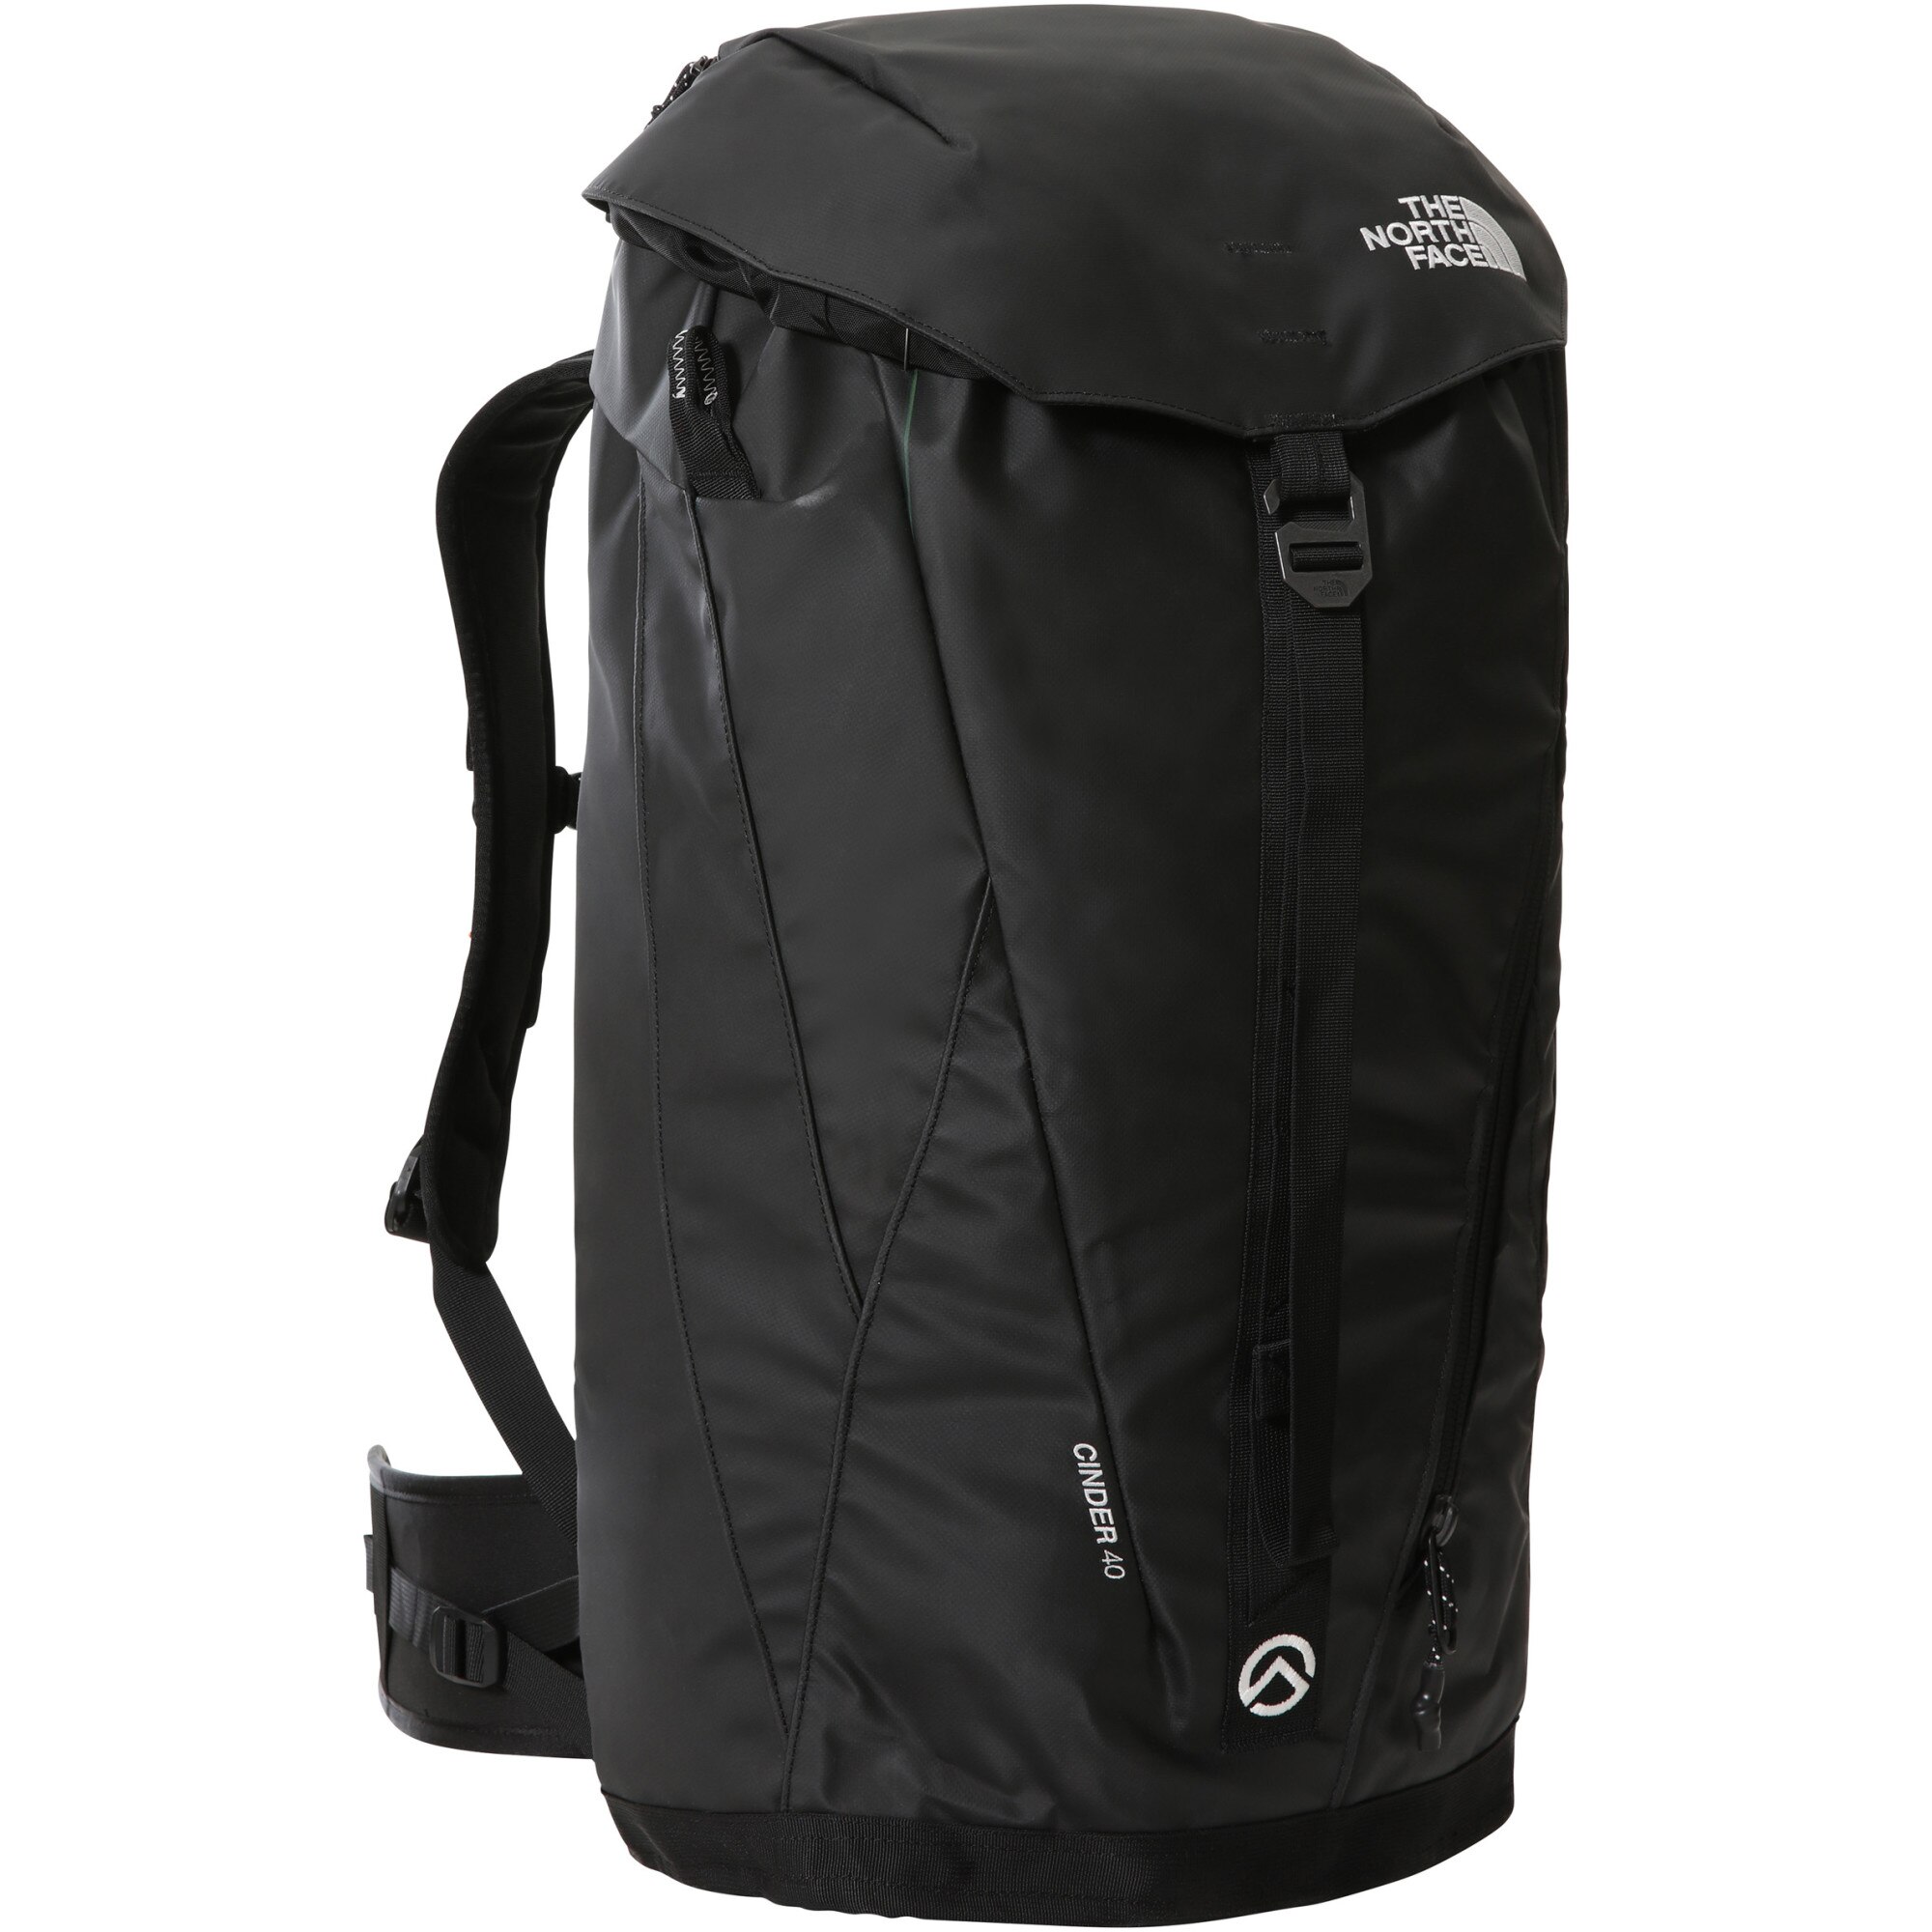 Remain Continent Sickness Rucsac The North face CINDER 40 Unisex, negru, OS - eMAG.ro